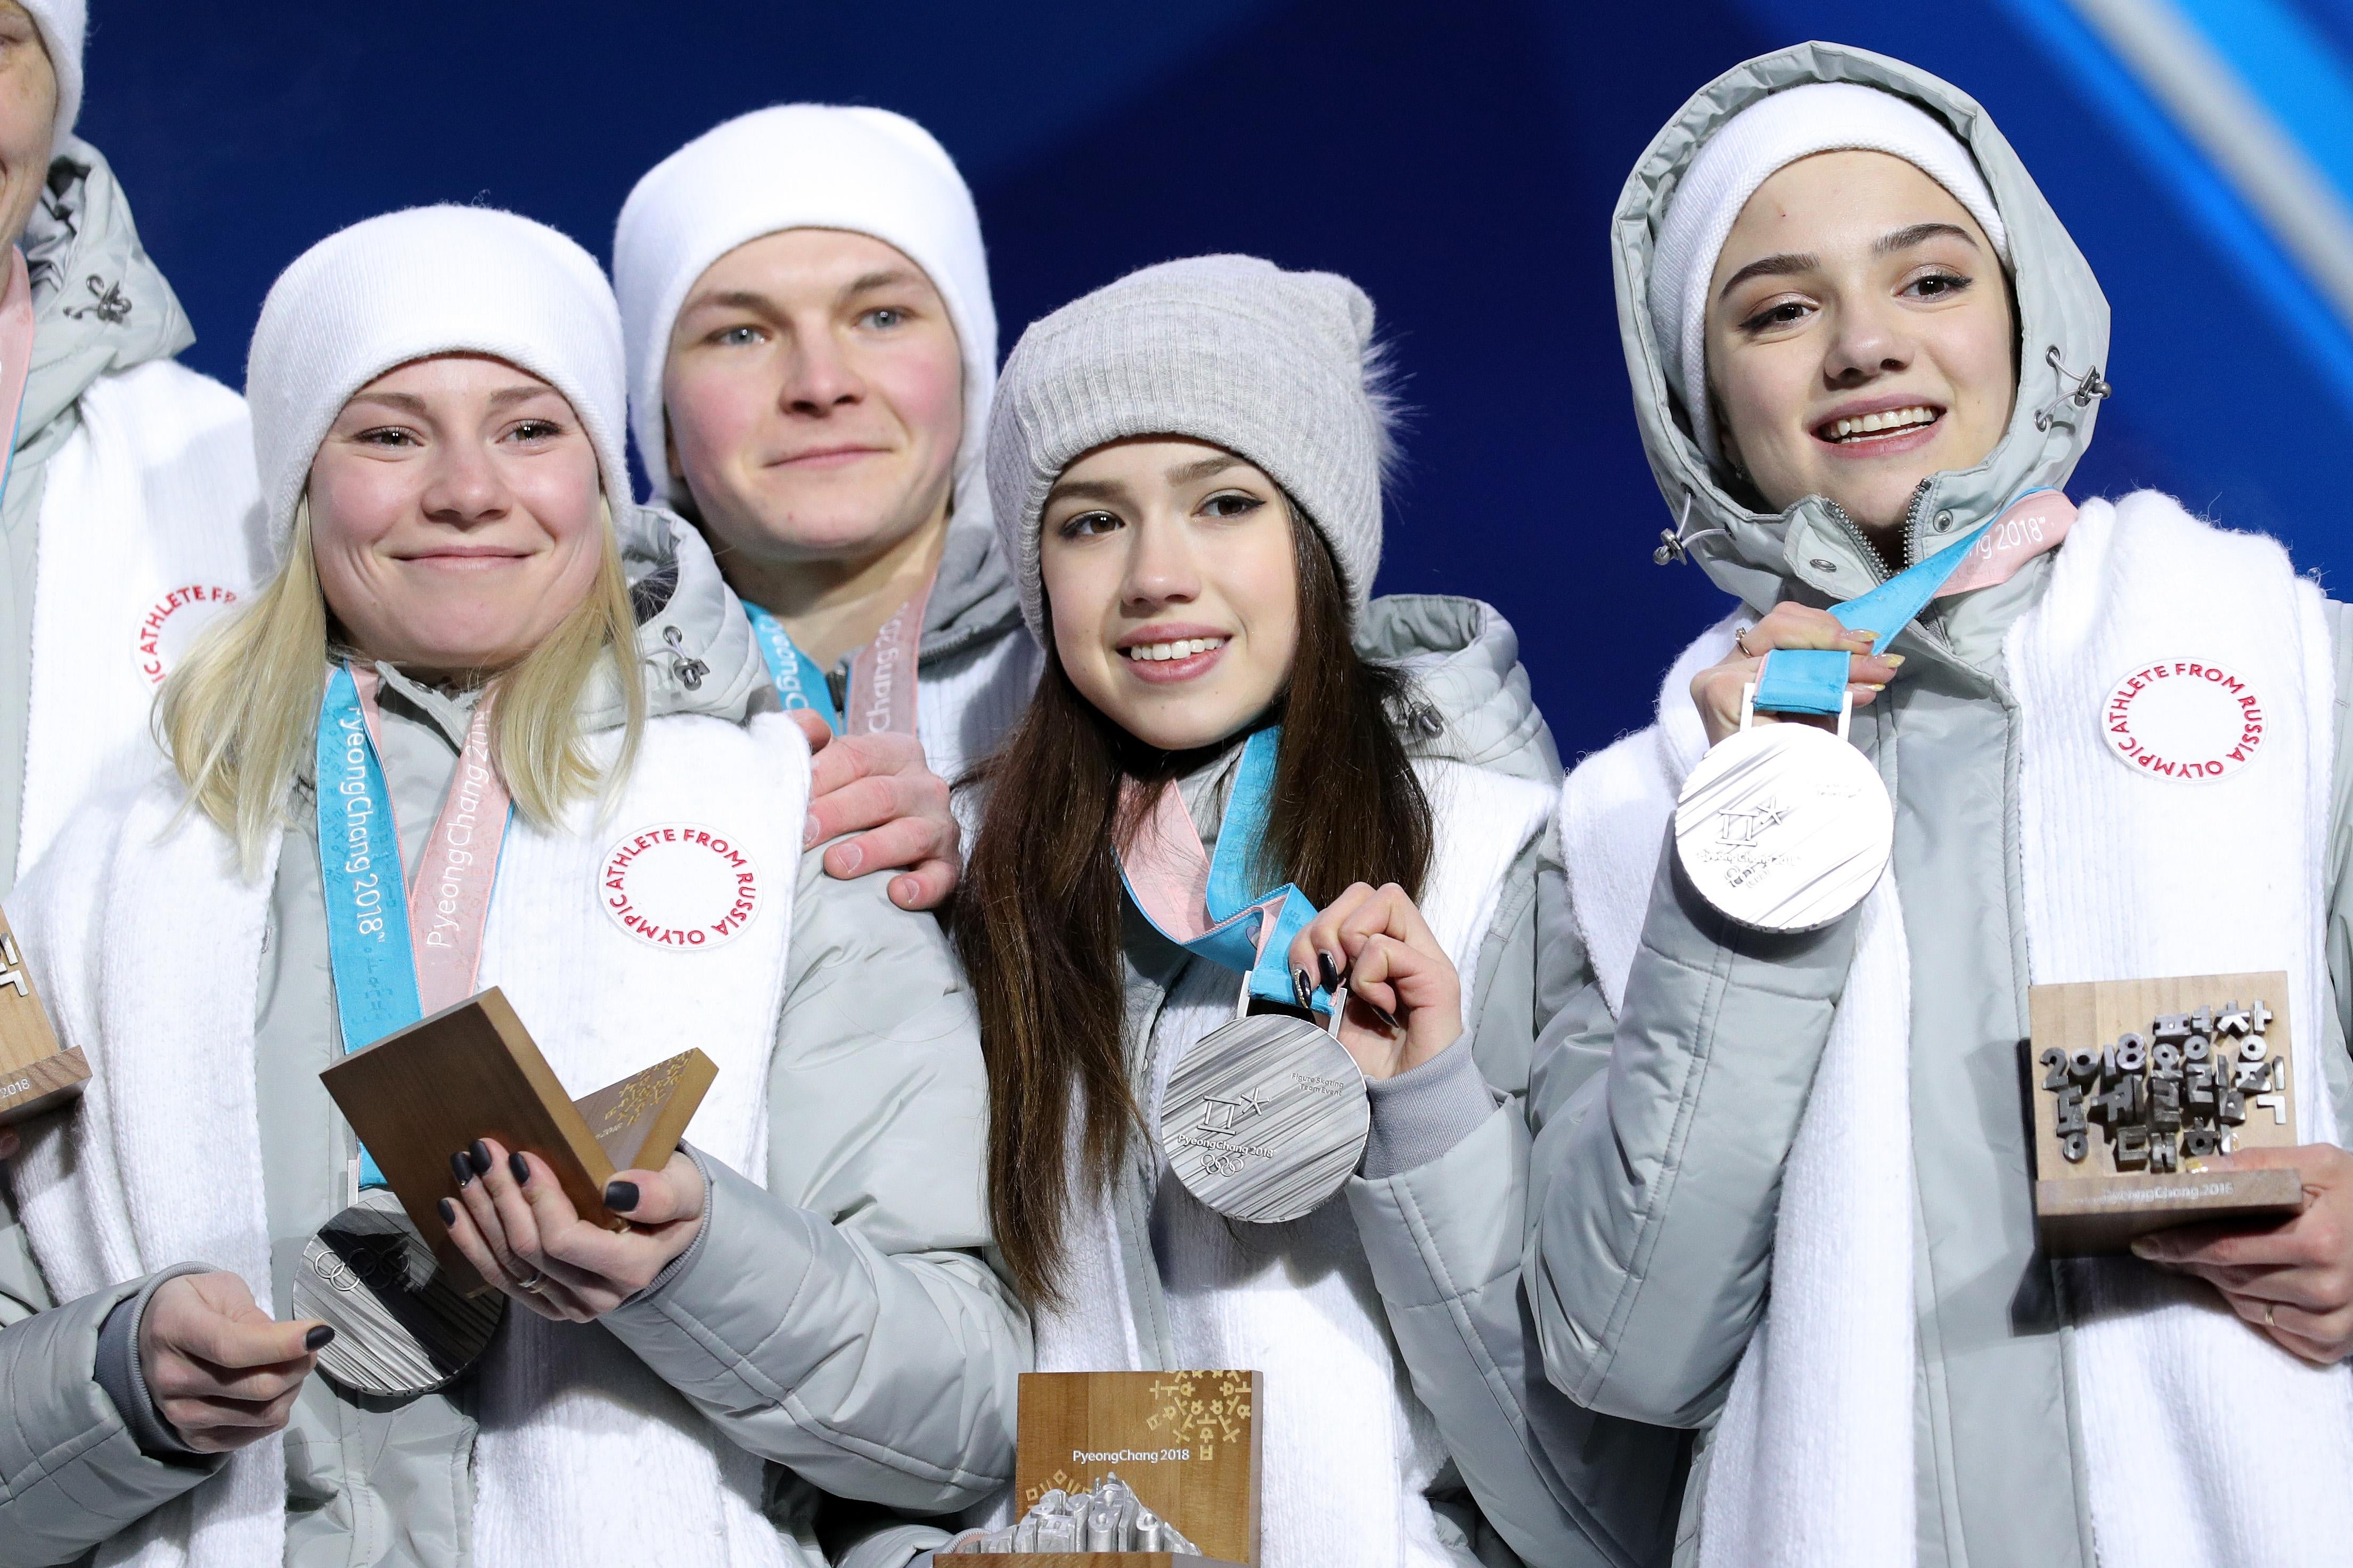 Four Olympic Athletes from Russia display the silver medals they won in the team figure skating event at the Pyeongchang Olympics.